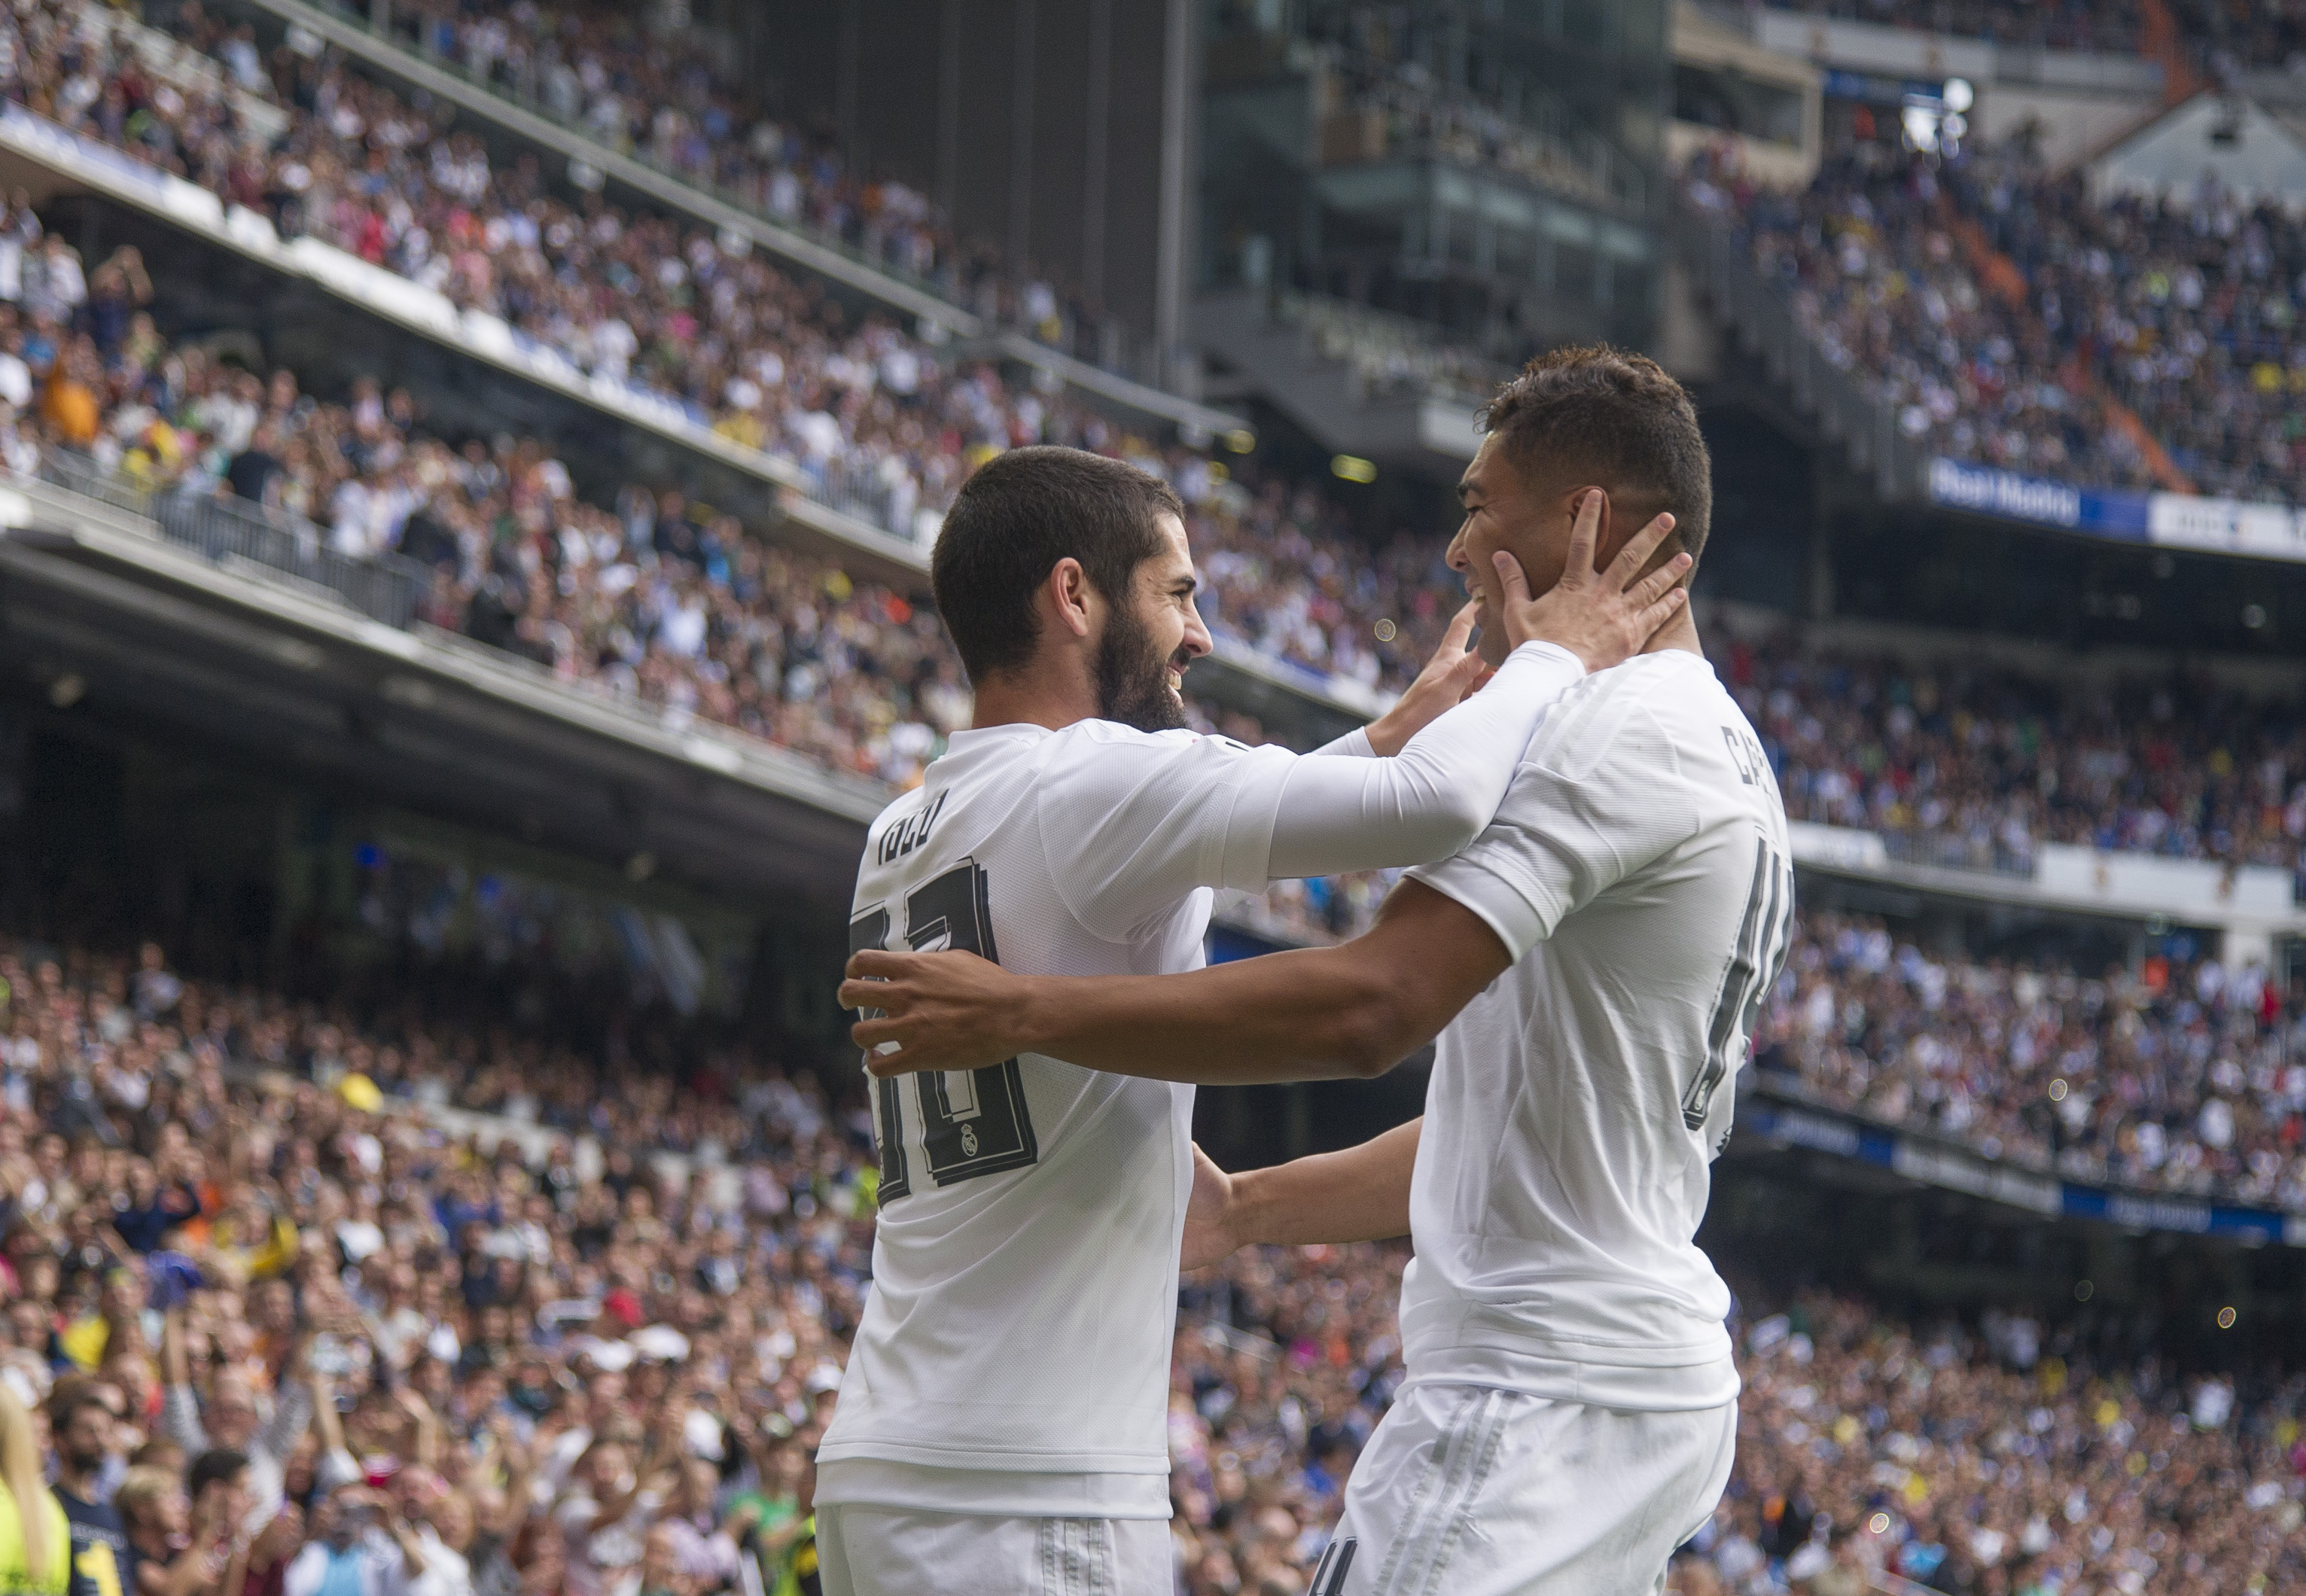 Real Madrid's midfielder Isco (L) celebrates a goal with Real Madrid's Brazilian midfielder Casimiro during the Spanish league football match Real Madrid CF vs UD Las Palmas at the Santiago Bernabeu stadium in Madrid on October 31, 2015.  AFP PHOTO / CURTO DE LA TORRE (Photo by CURTO DE LA TORRE / AFP)        (Photo credit should read CURTO DE LA TORRE/AFP/Getty Images)